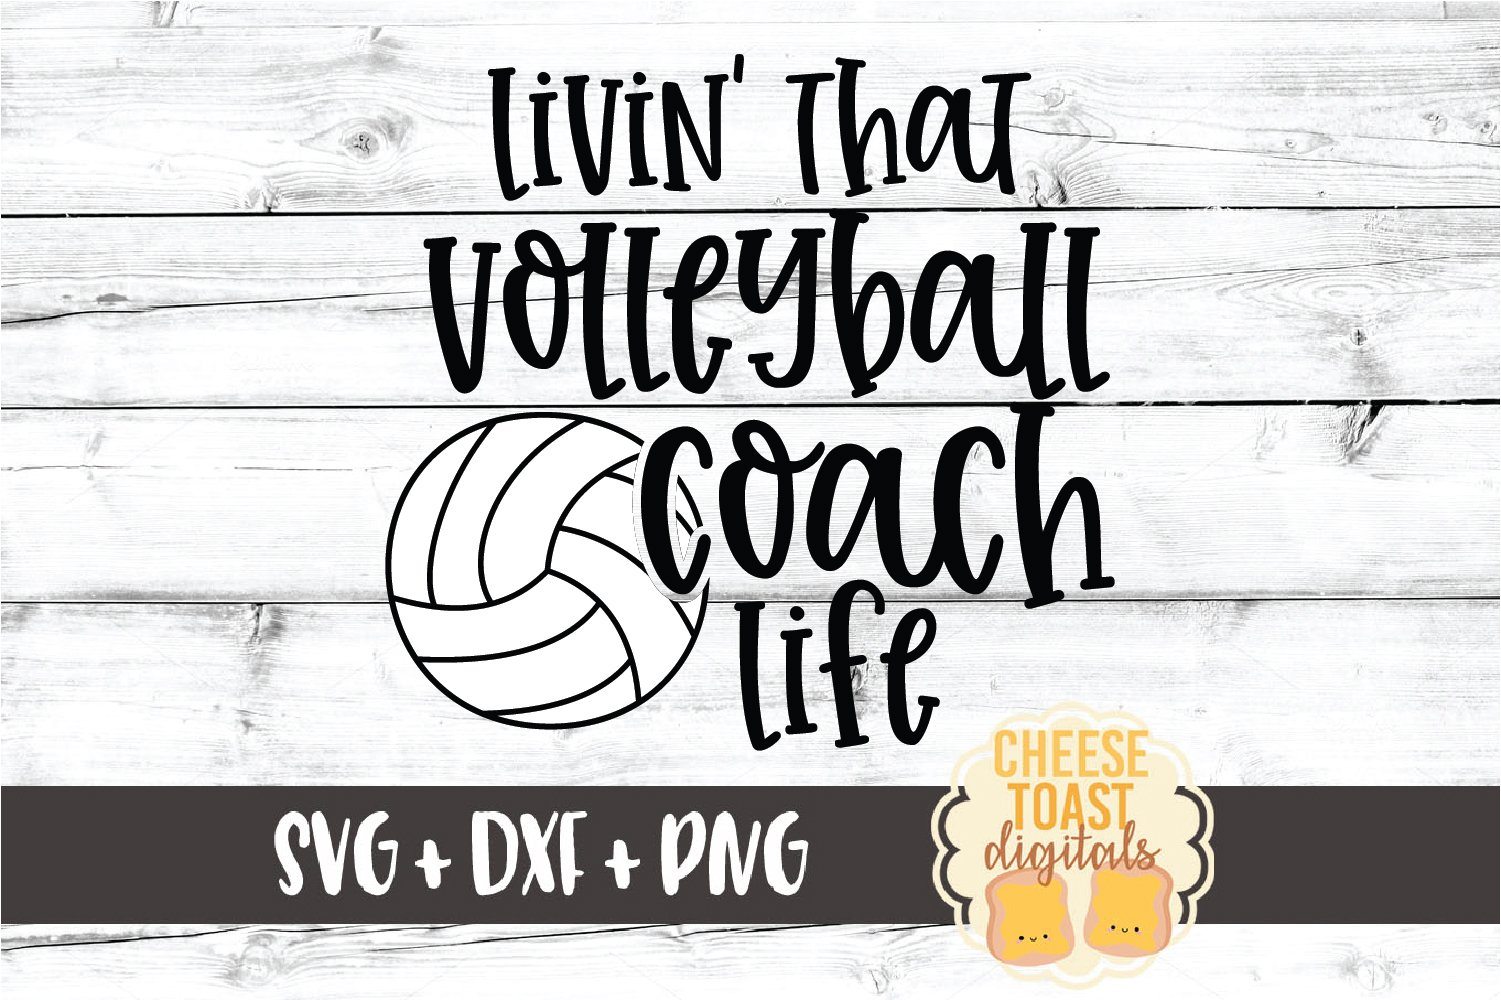 Download Livin That Volleyball Coach Life Volleyball Svg Png Dxf Cut Files So Fontsy